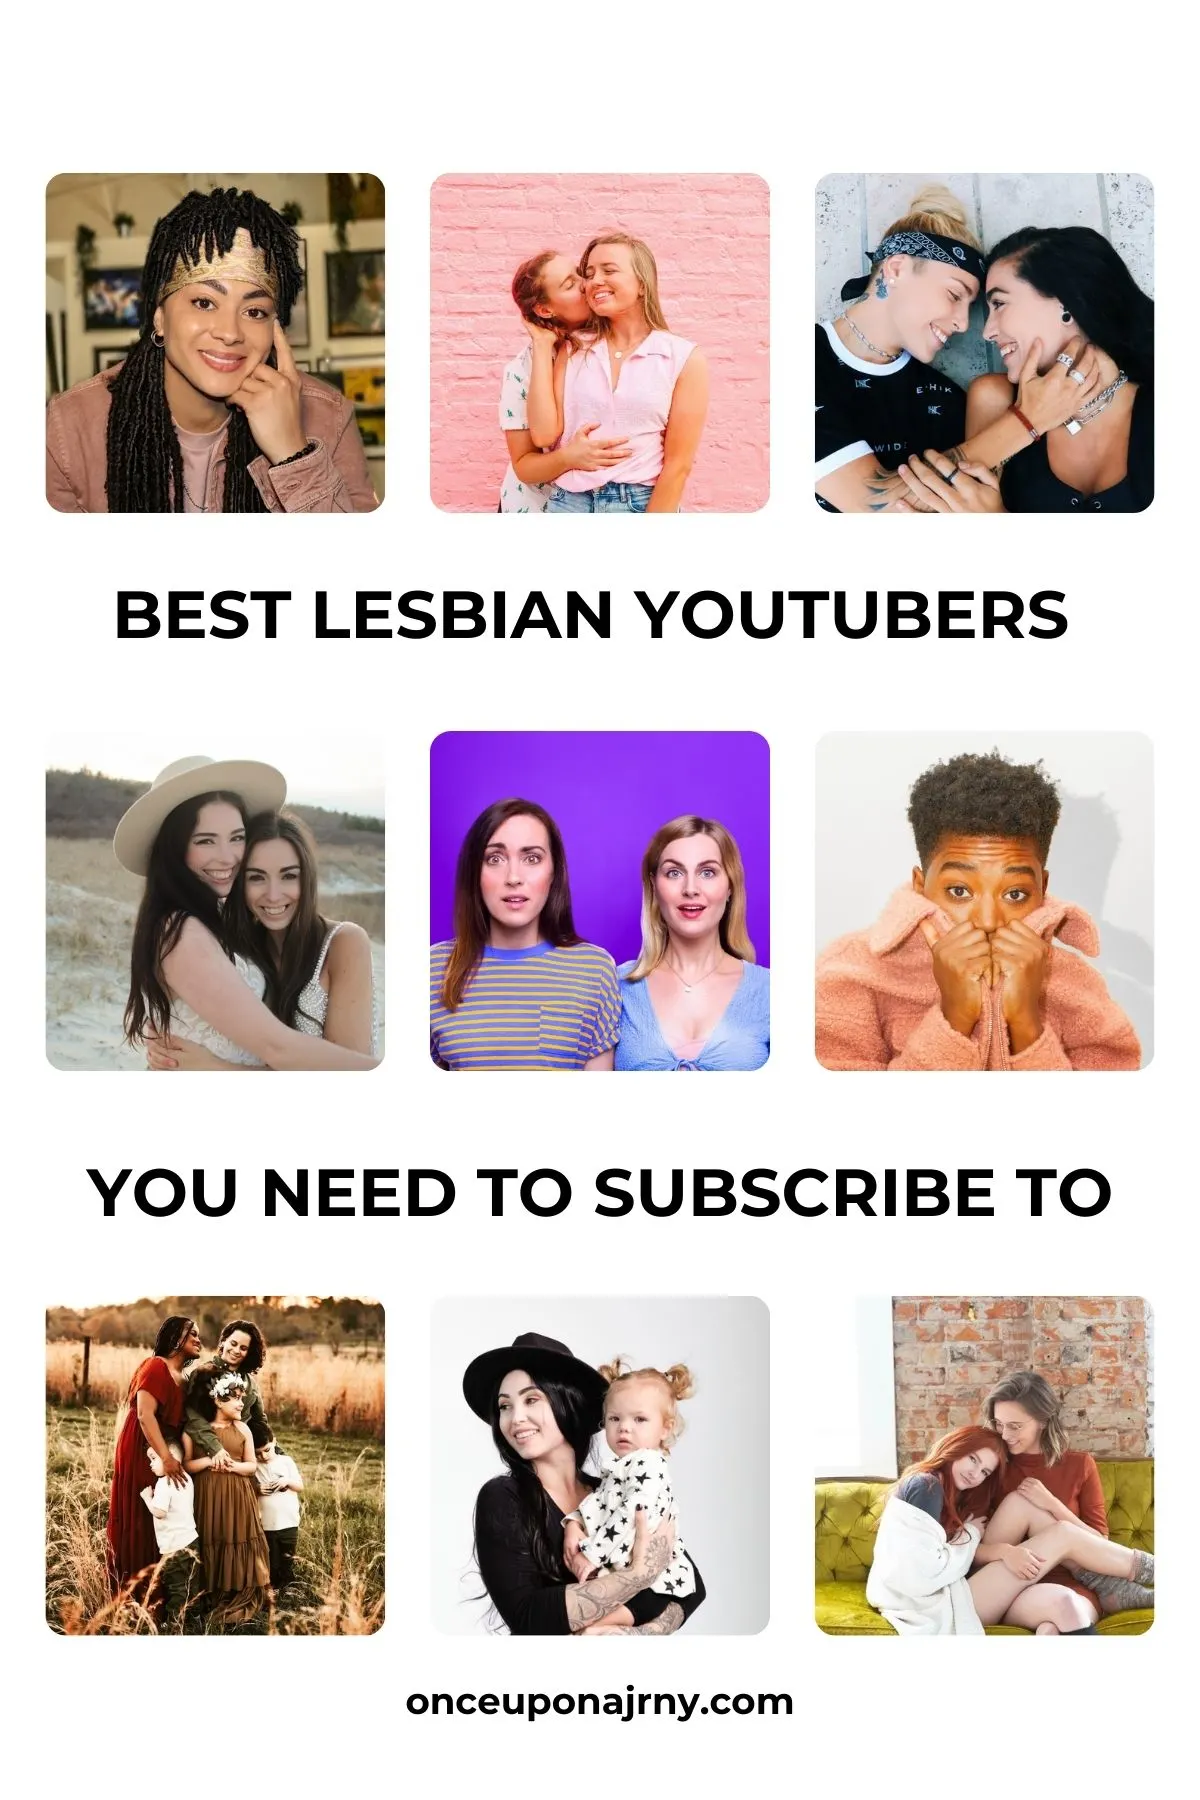 Lesbian YouTube: 40+ Best Lesbian YouTubers To Subscribe To